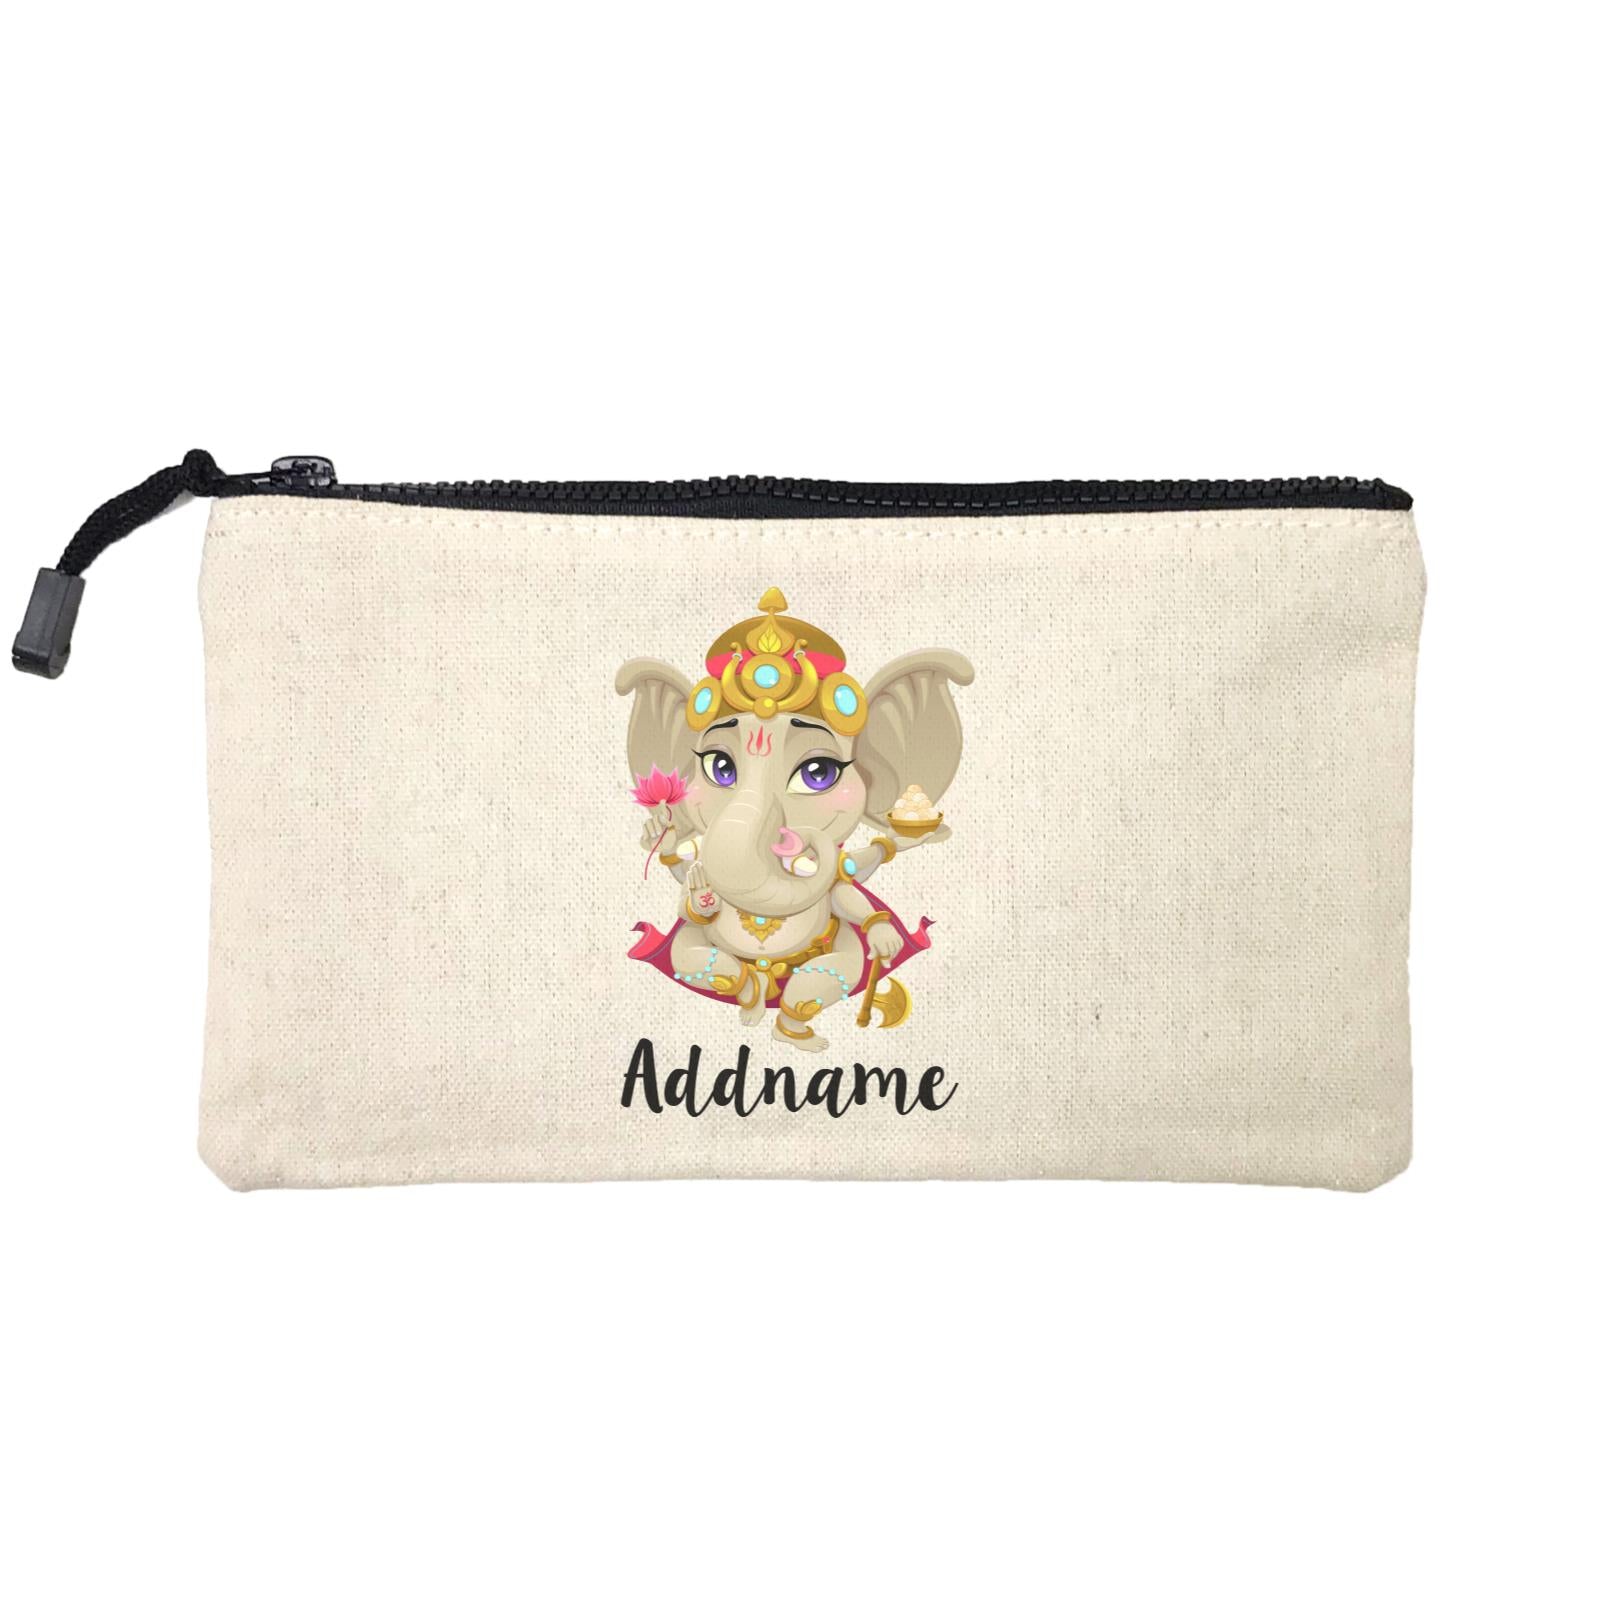 Artistic Ganesha Addname Mini Accessories Stationery Pouch